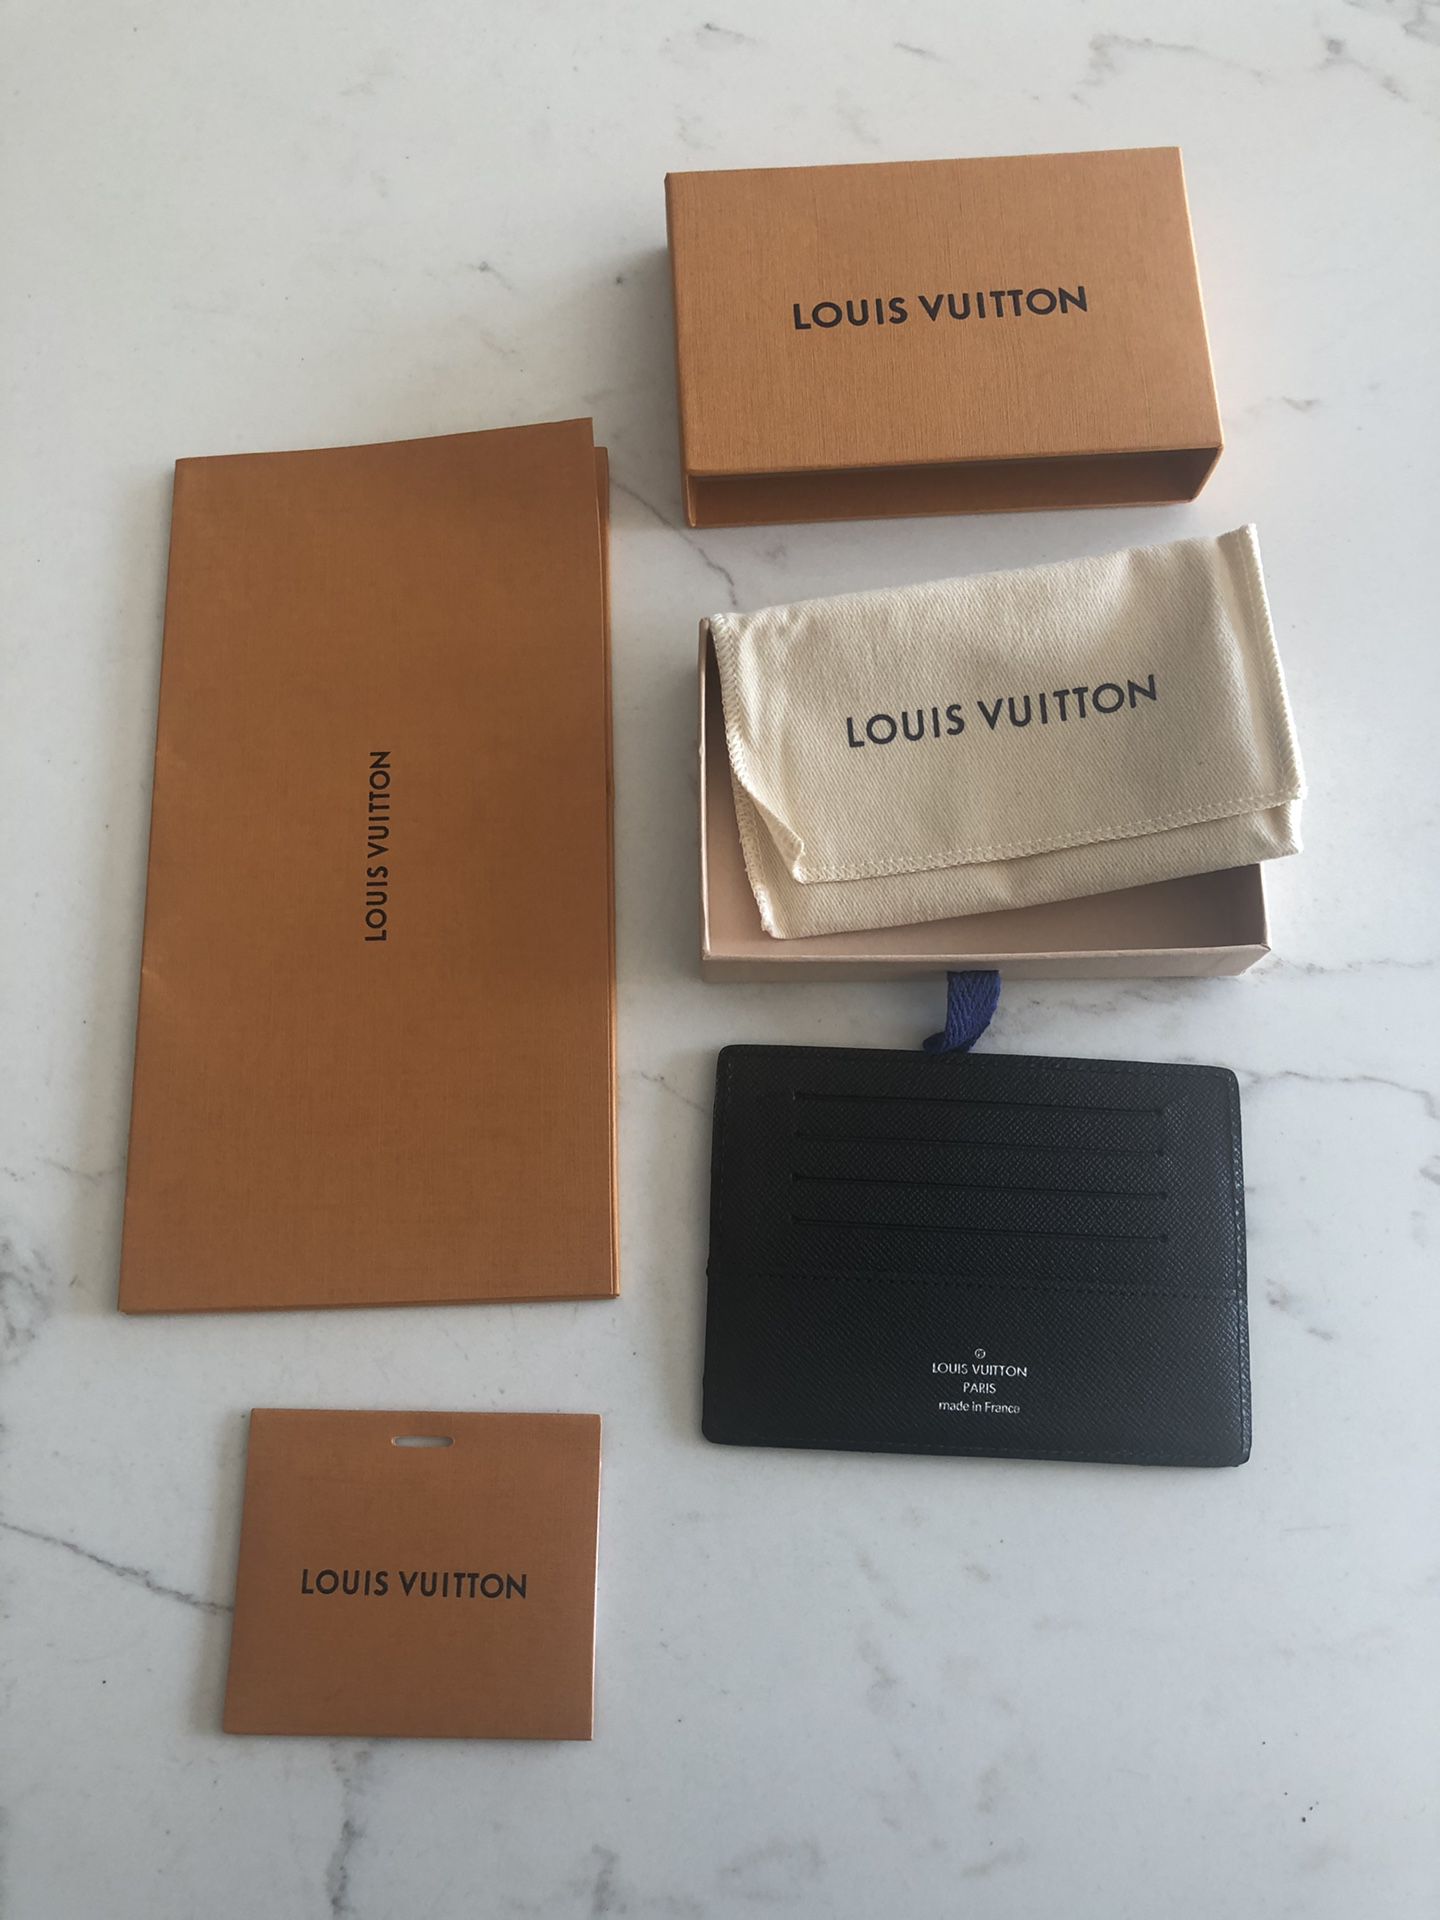 Like New Louis Vuitton Card Holder!! 100% Authentic with Receipt (see photos)!!